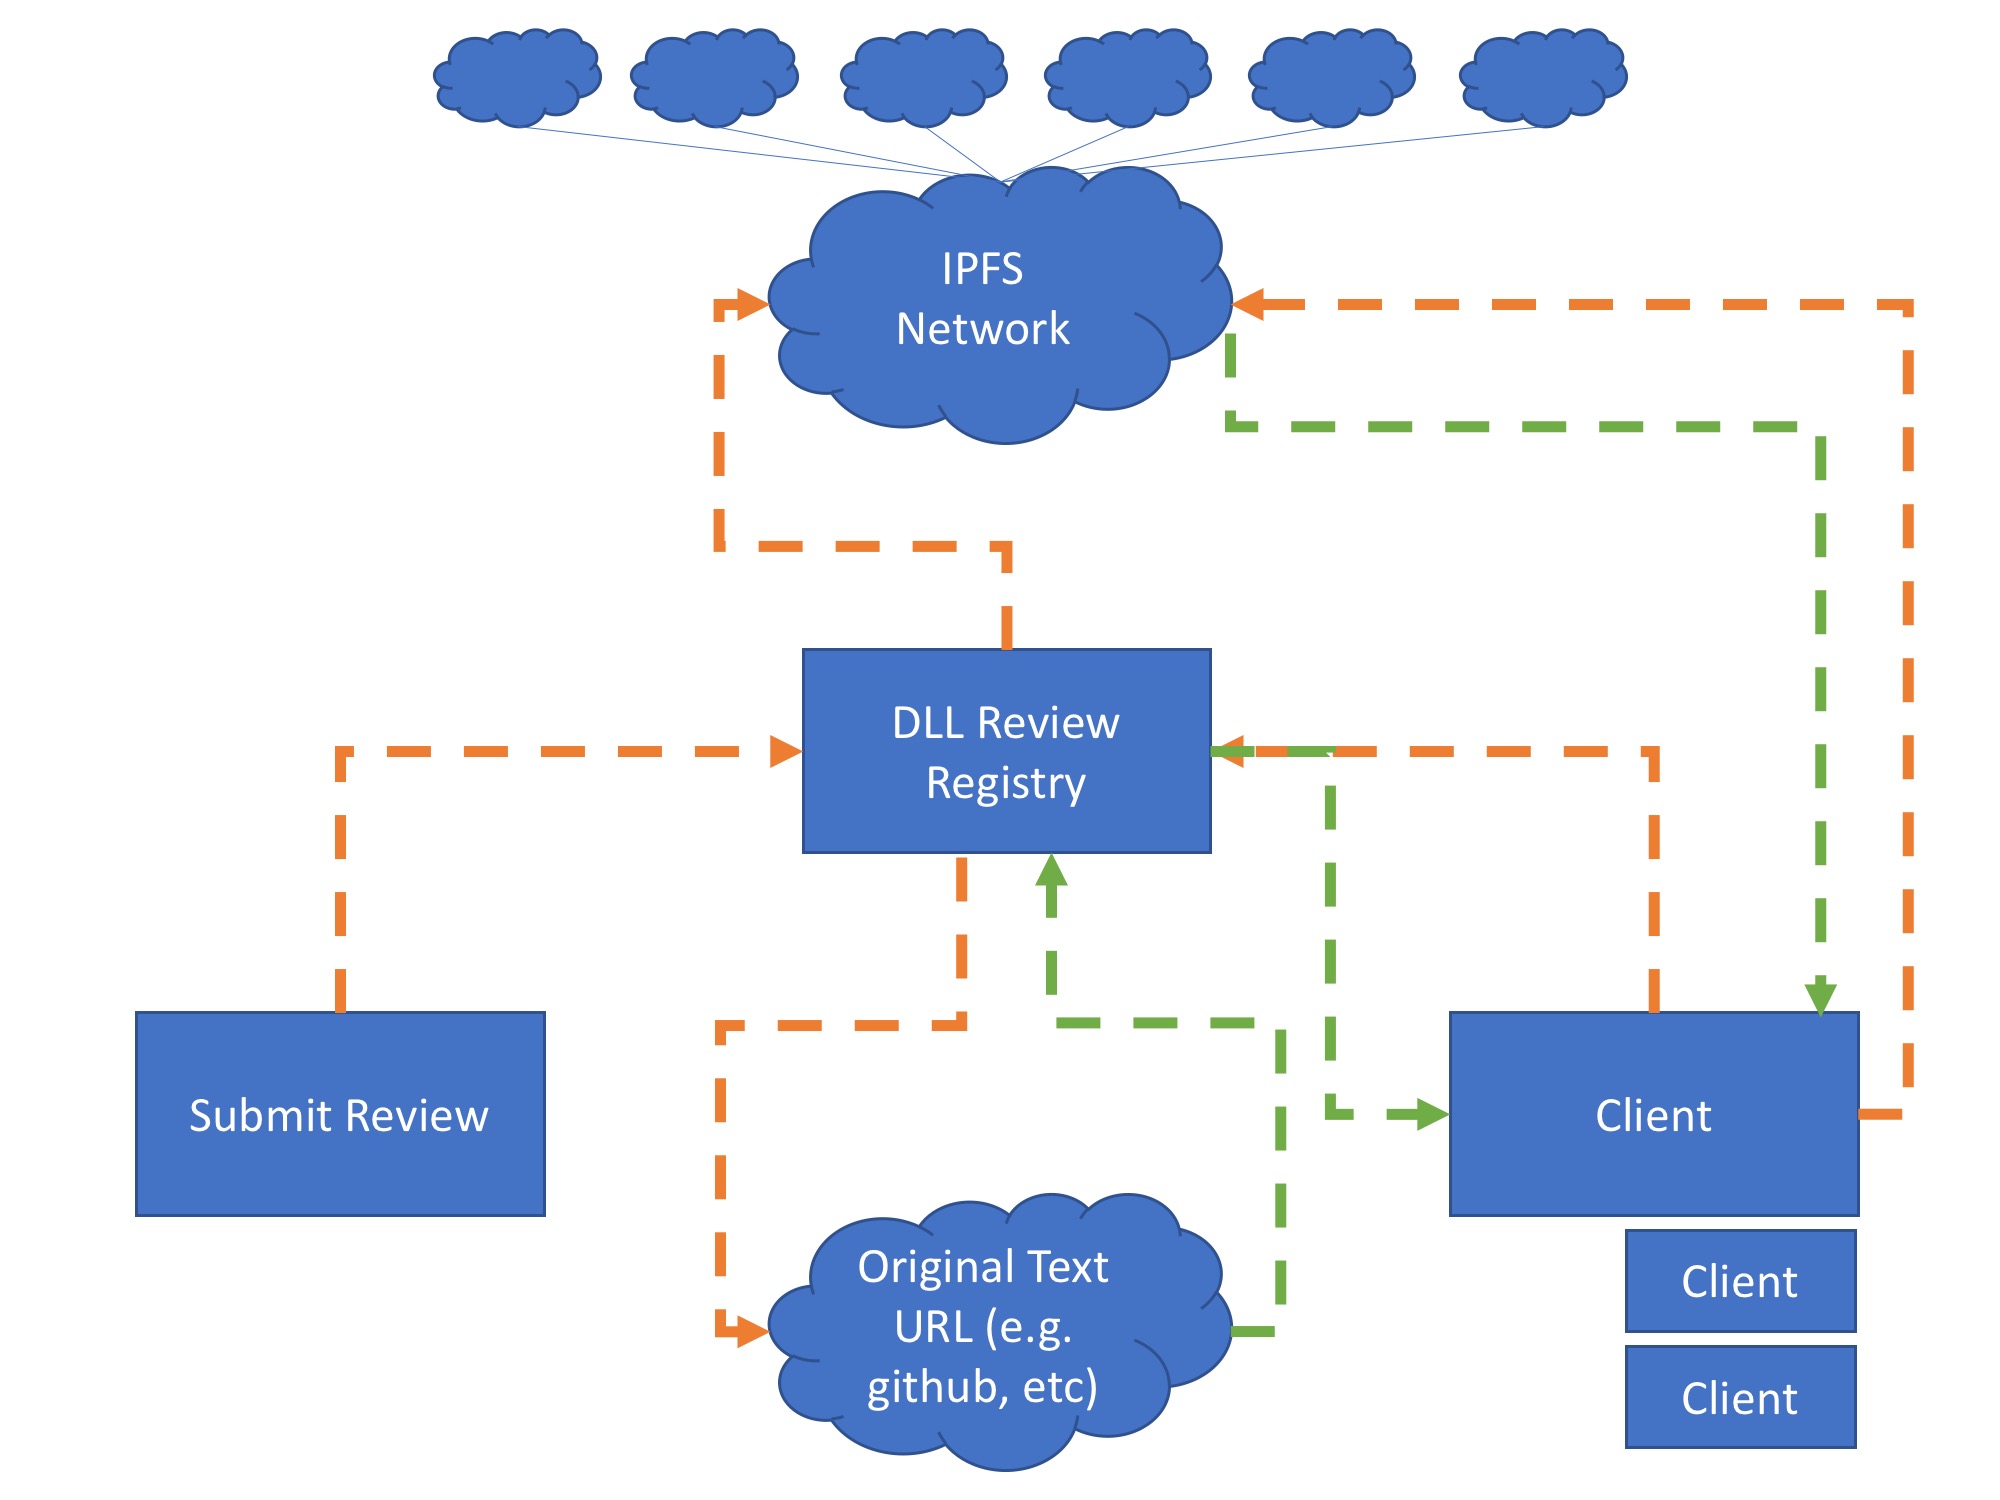 Anticipated interactions between the DLL Review Registry and client
                            systems.